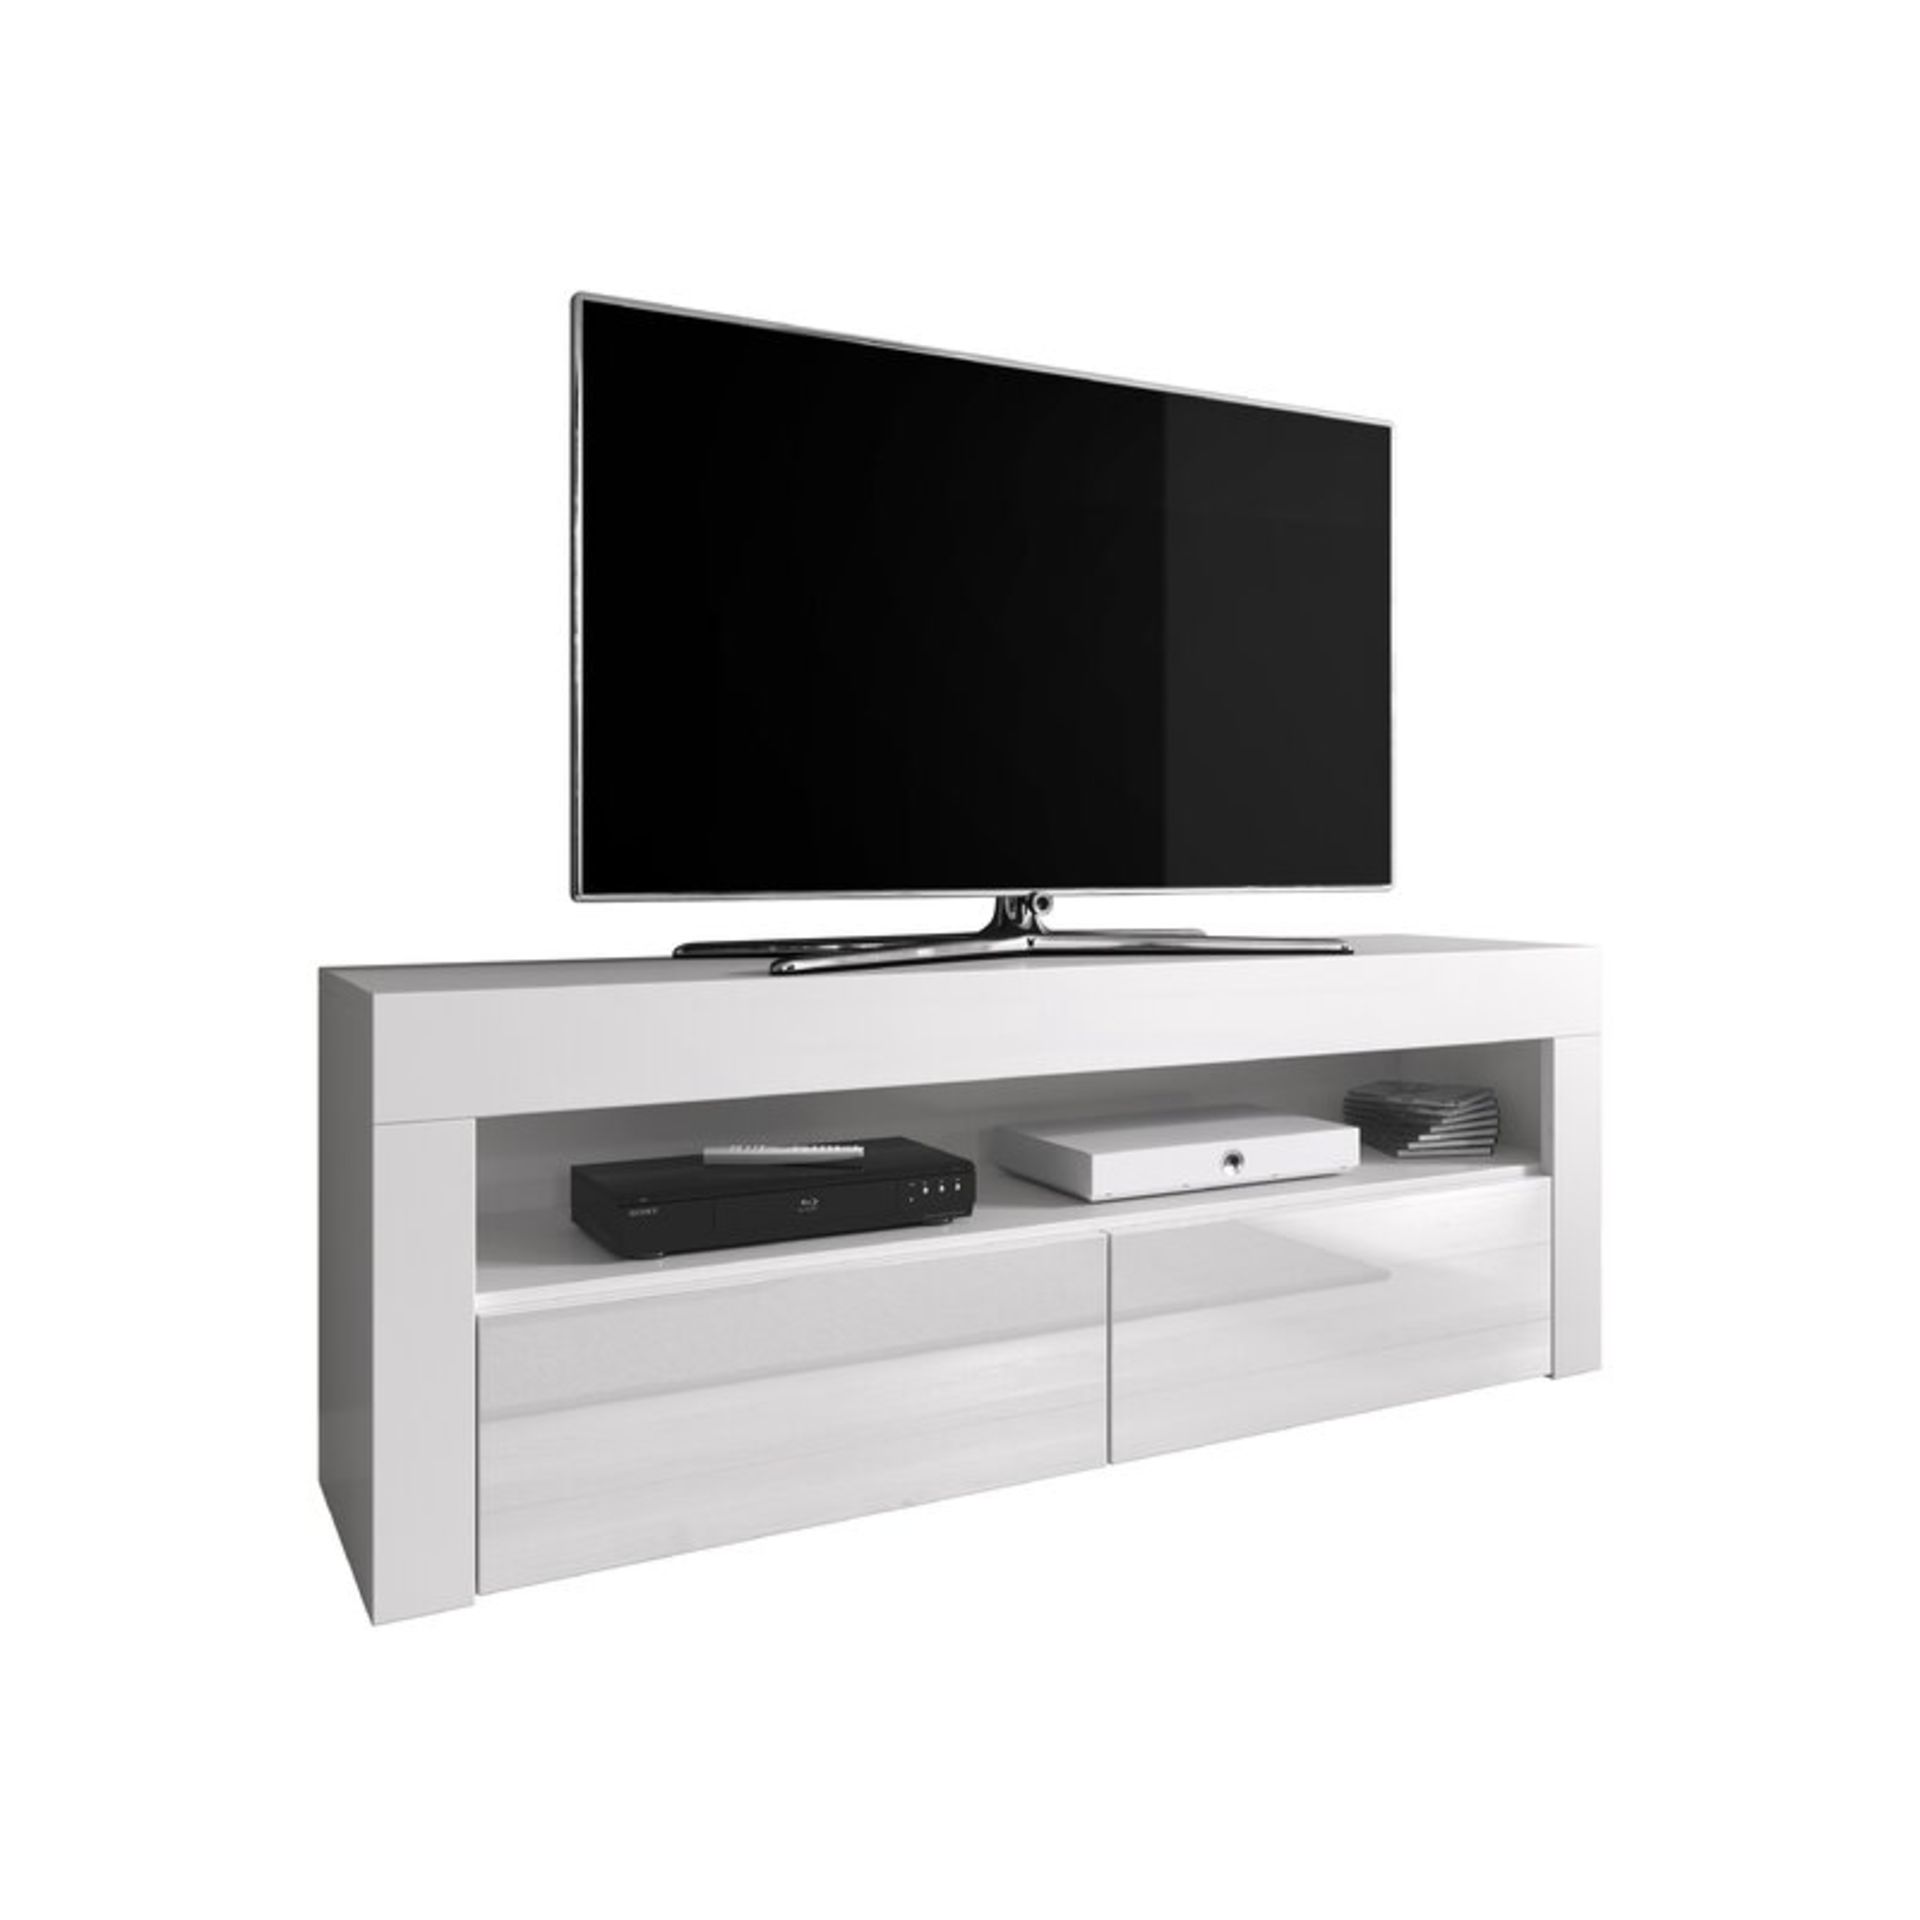 Hutchison TV Stand for TVs up to 55" White - RRP £196.99